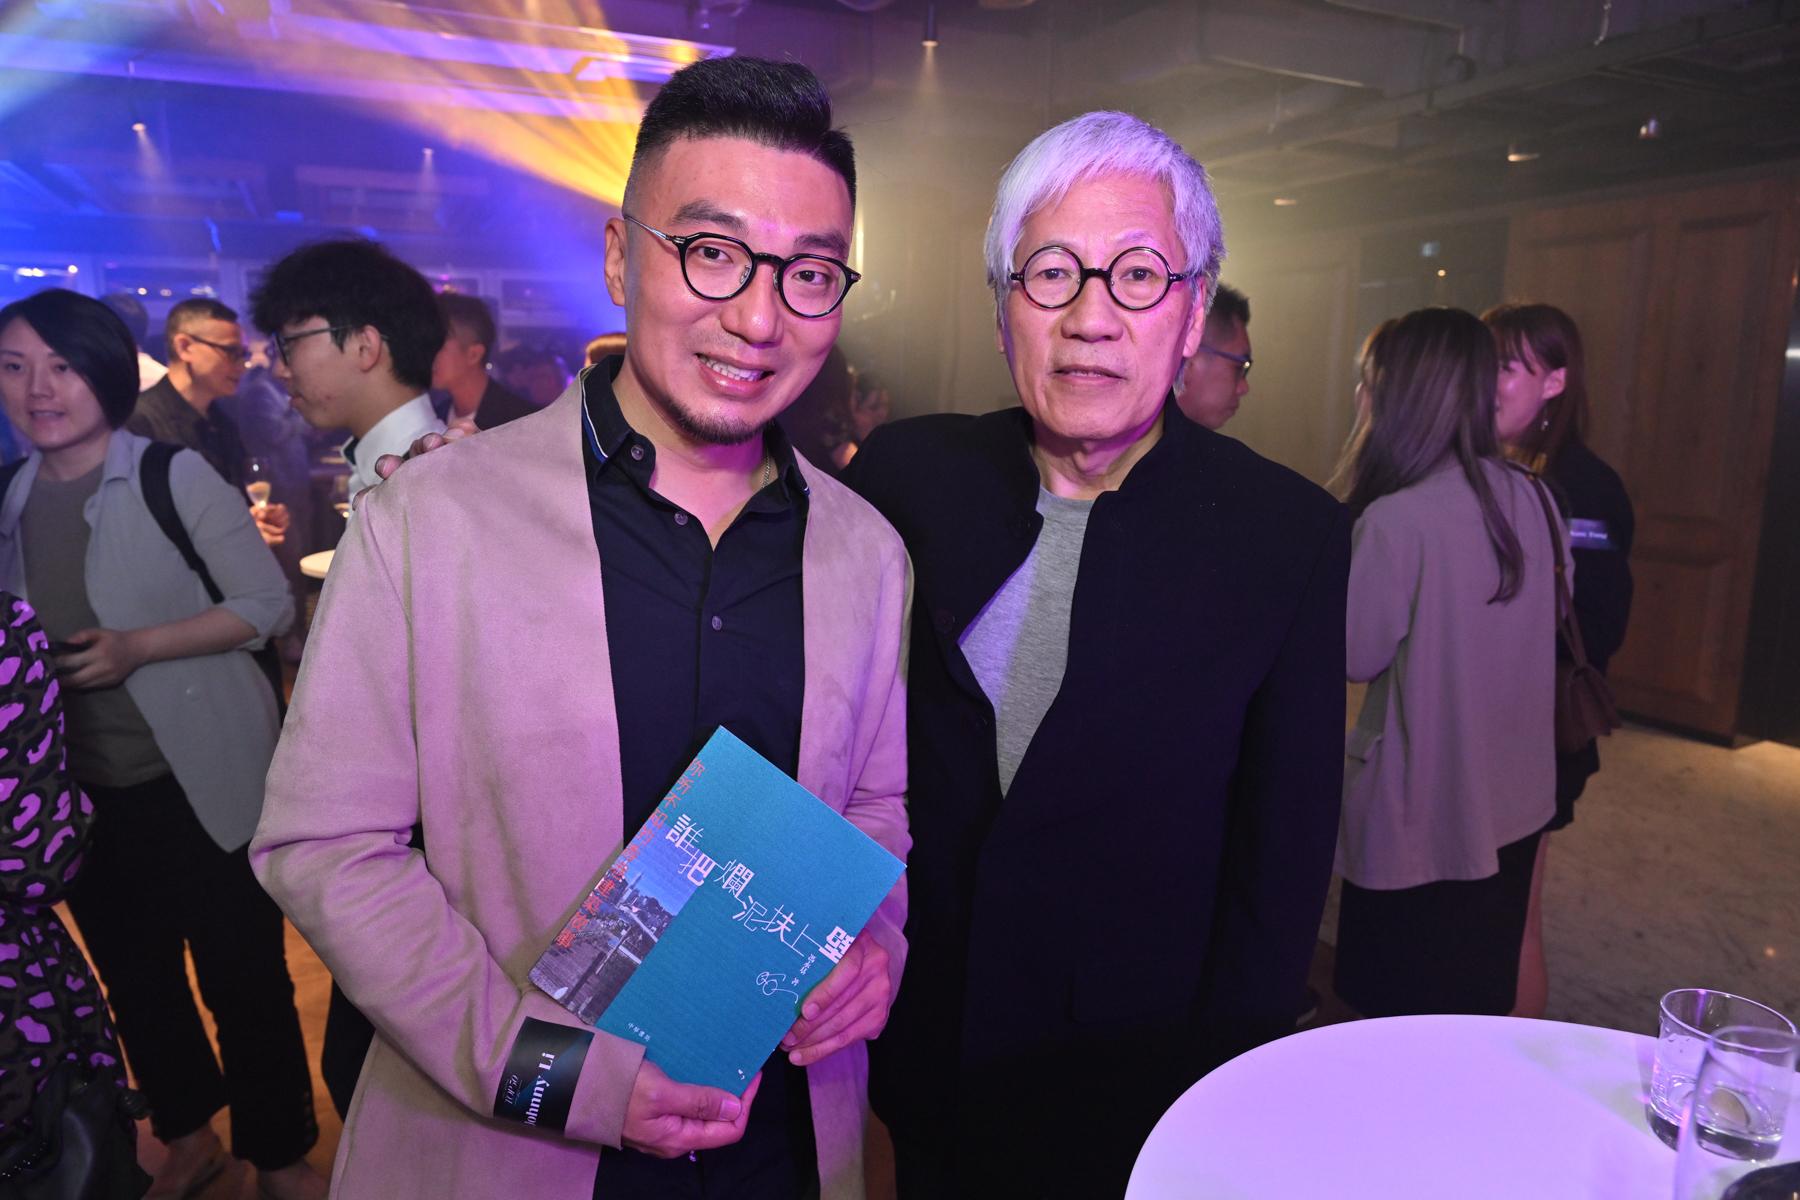 Home Journal Top 50 Cocktail Soirée brings together elites in architecture and interior design